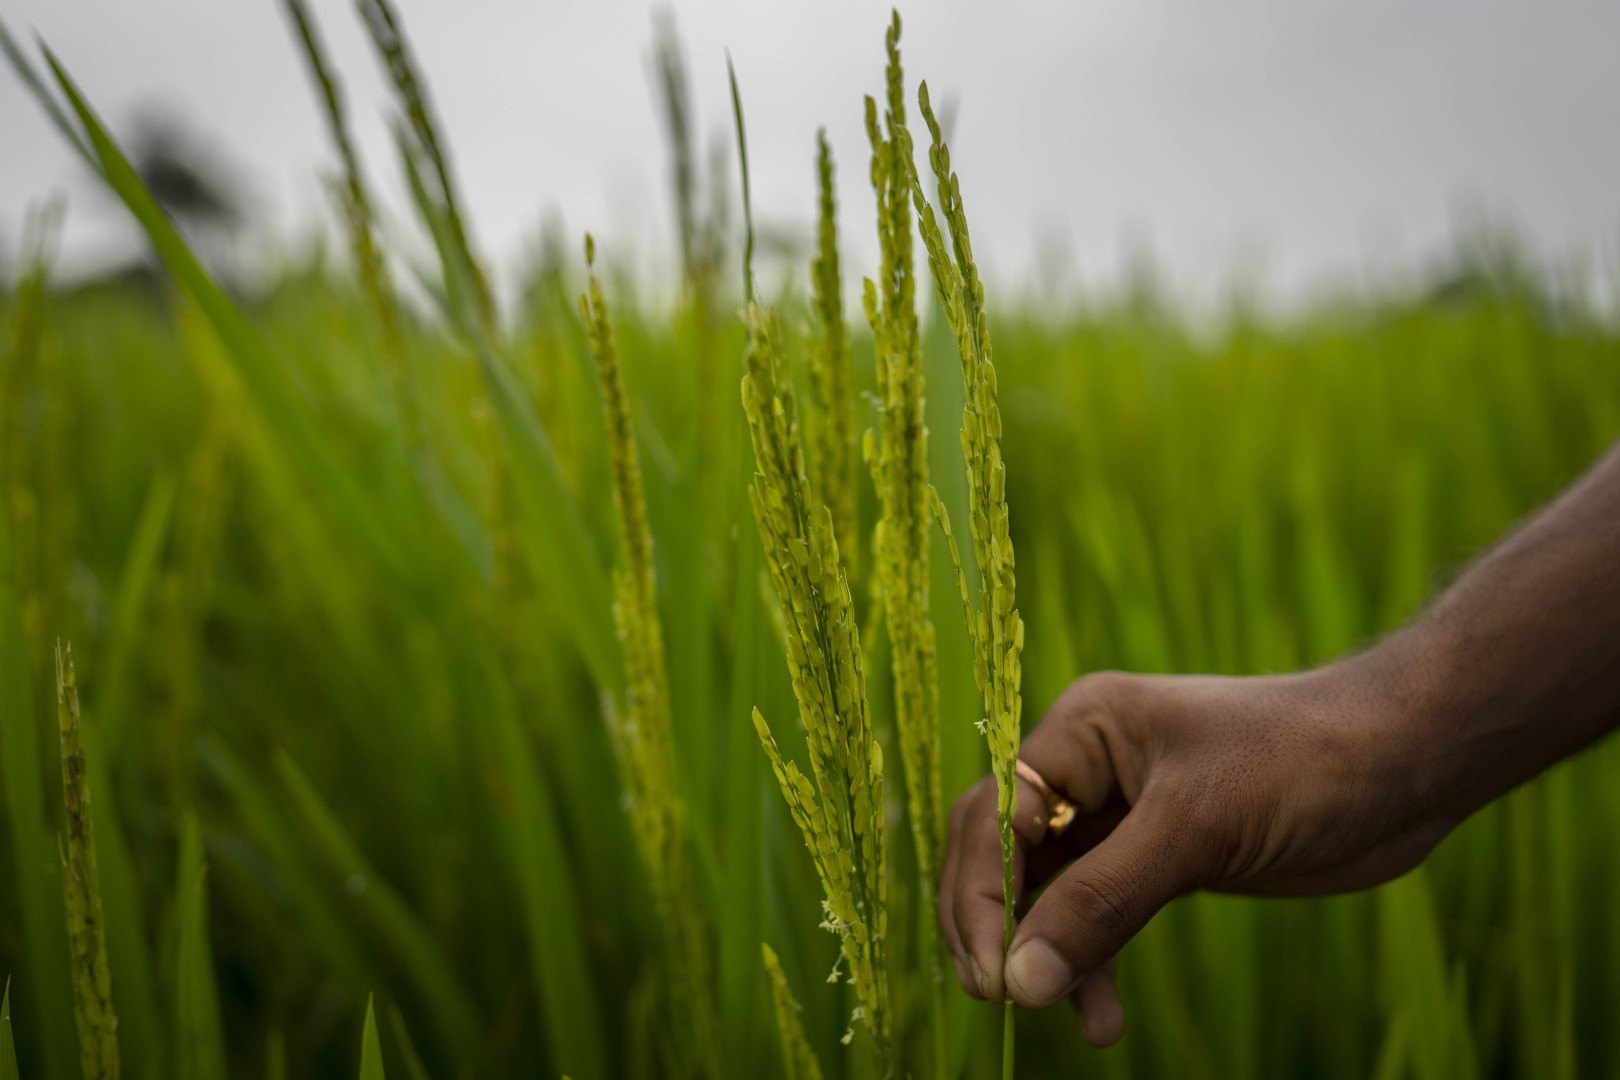 rice, rice, maybe: india has already restricted exports of wheat and sugar, and analysts worry the staple food could be next | south china morning post